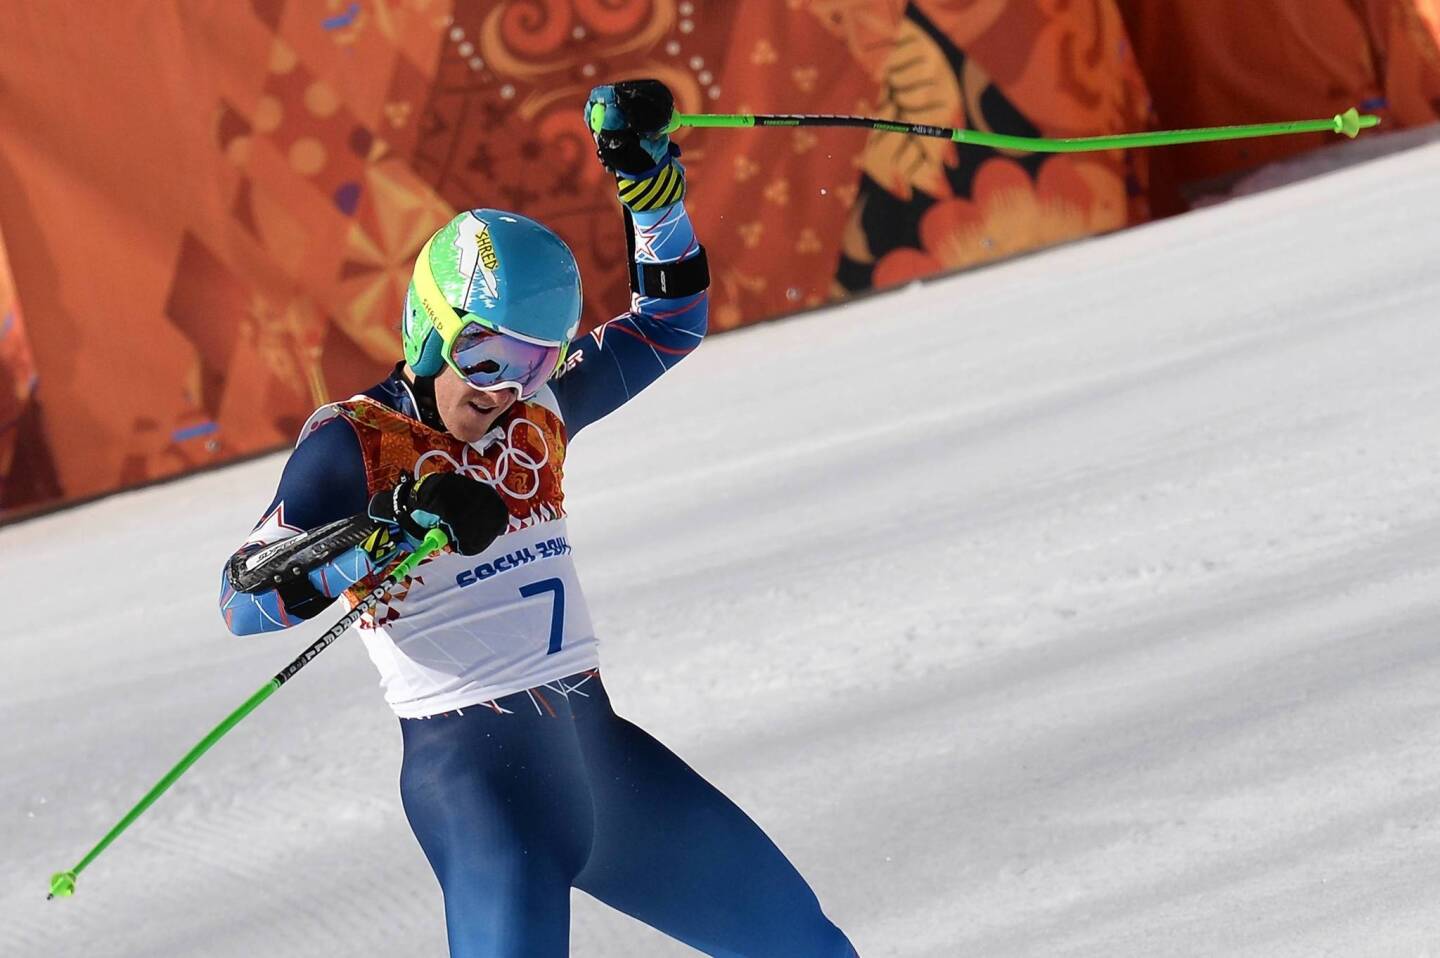 Ligety takes the gold